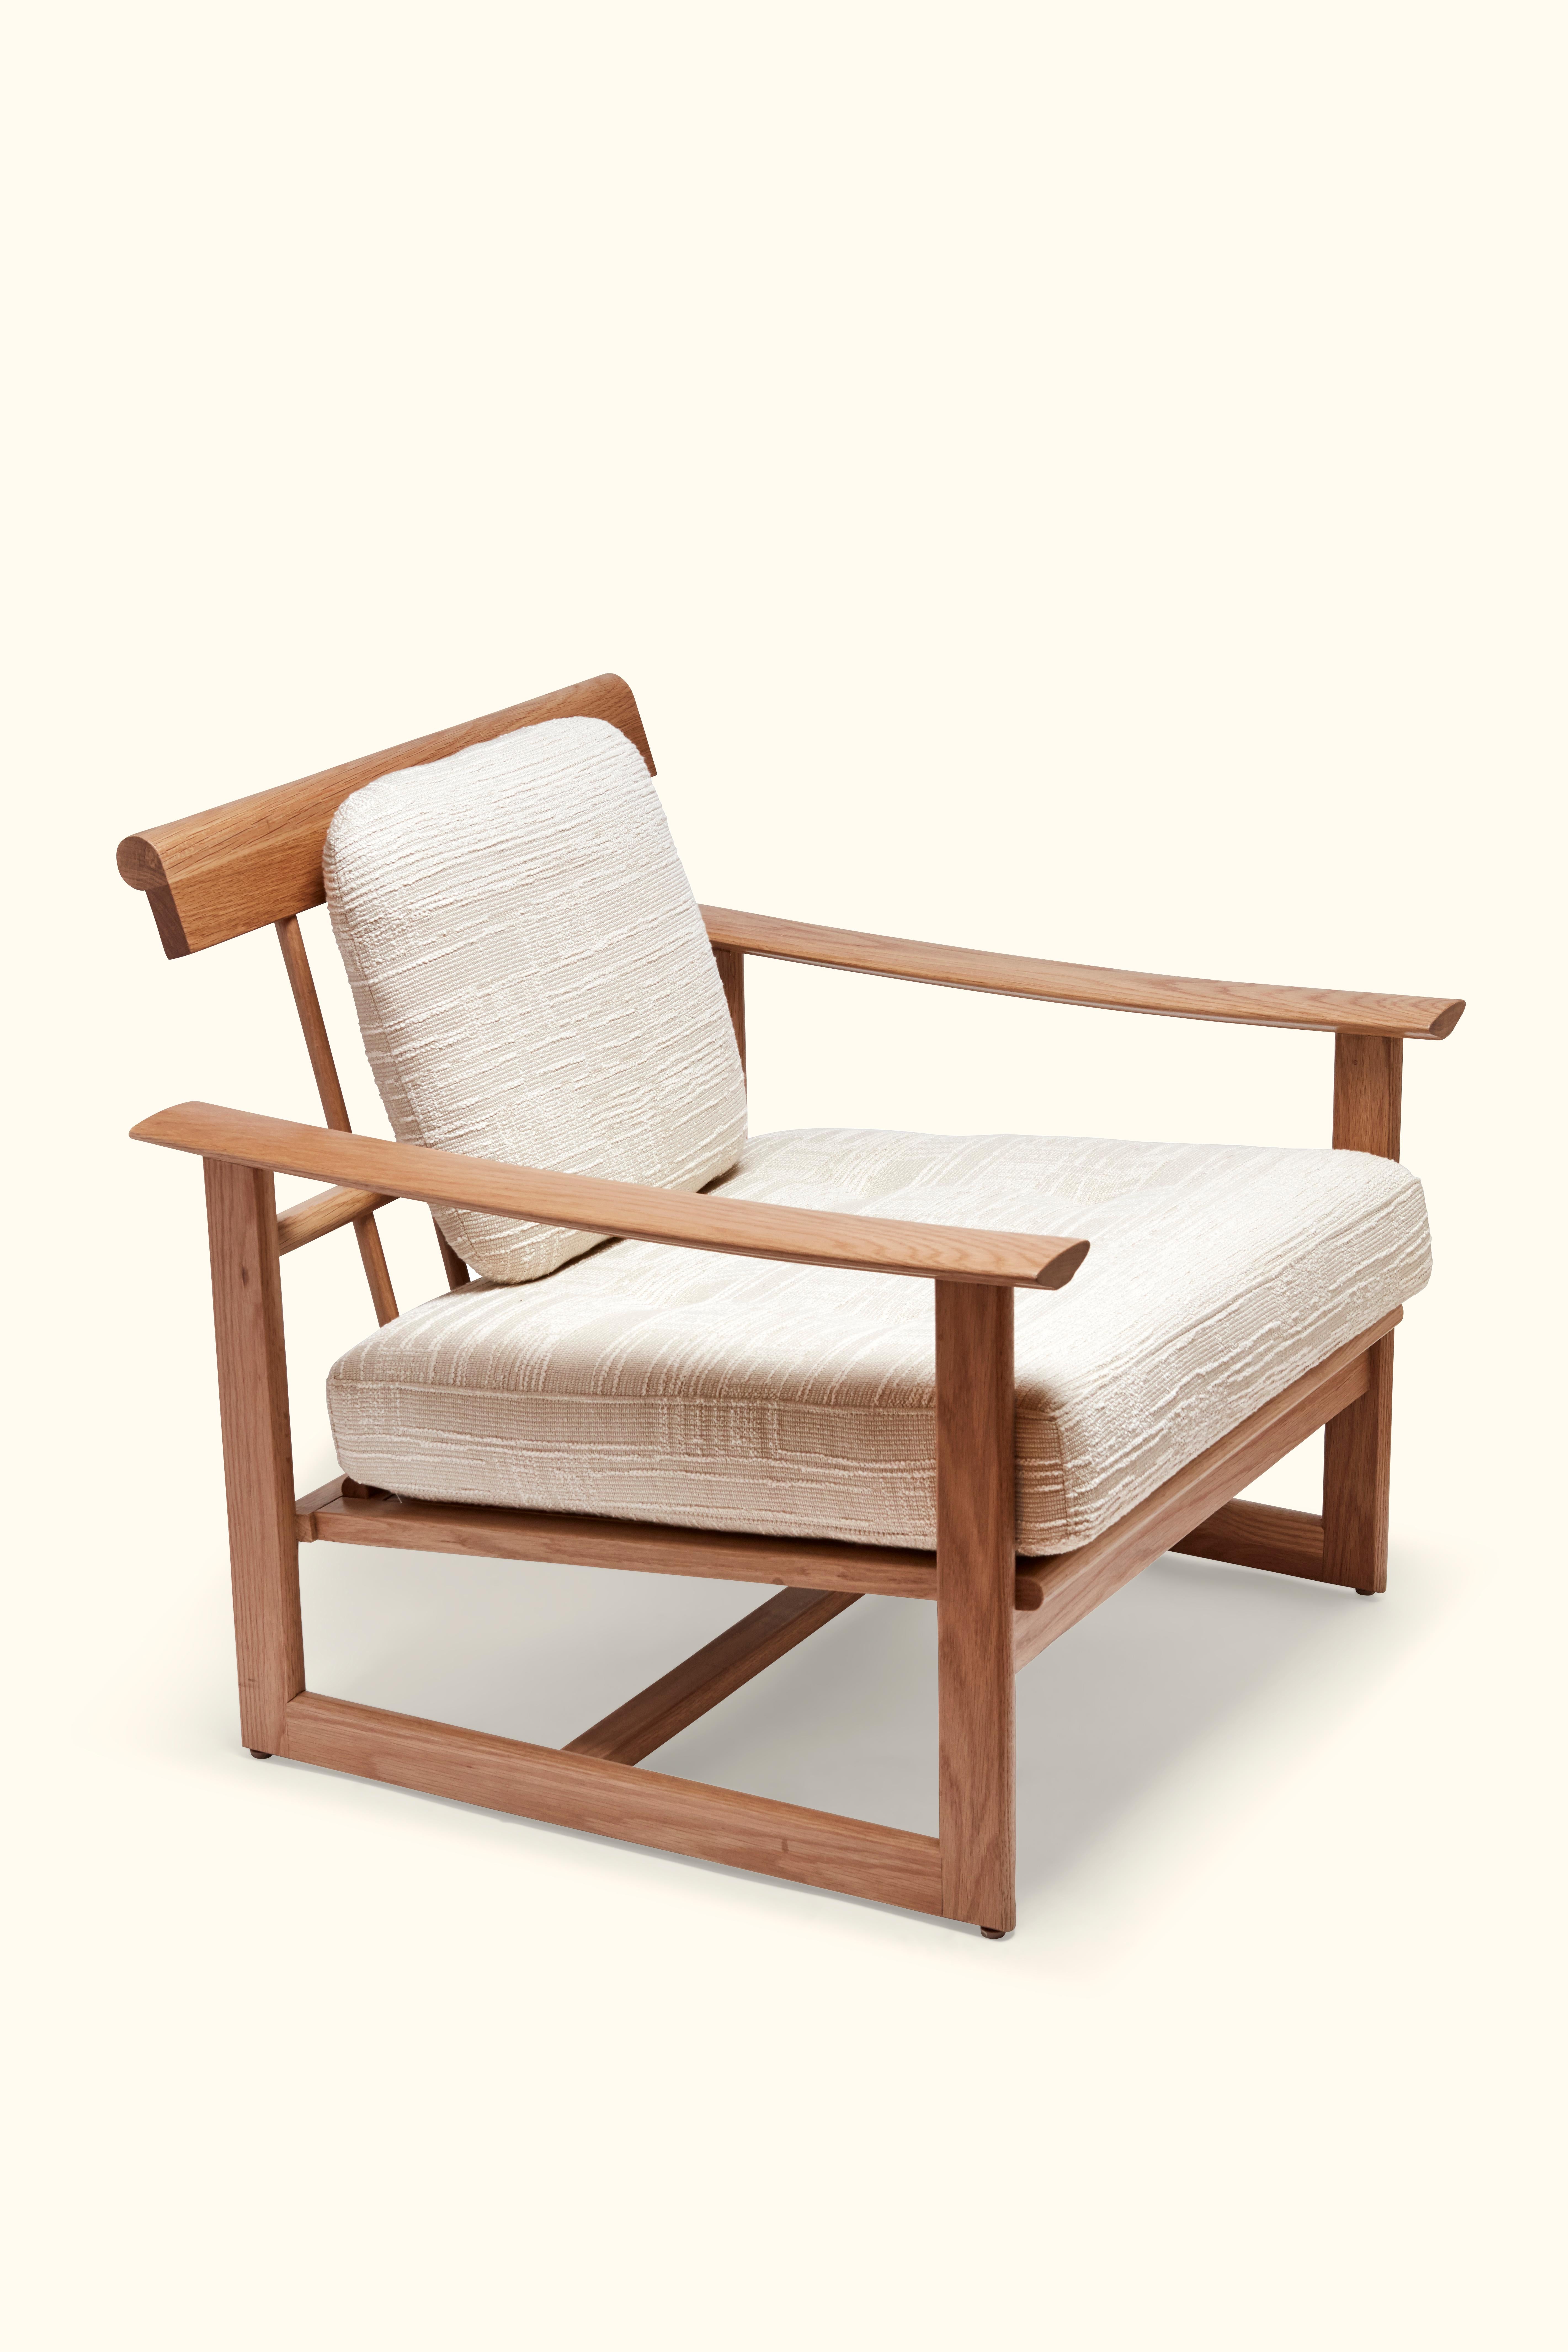 Inverness chair by Lawson-Fenning

As shown: $2,850
To order: $2,450 + COM.
 